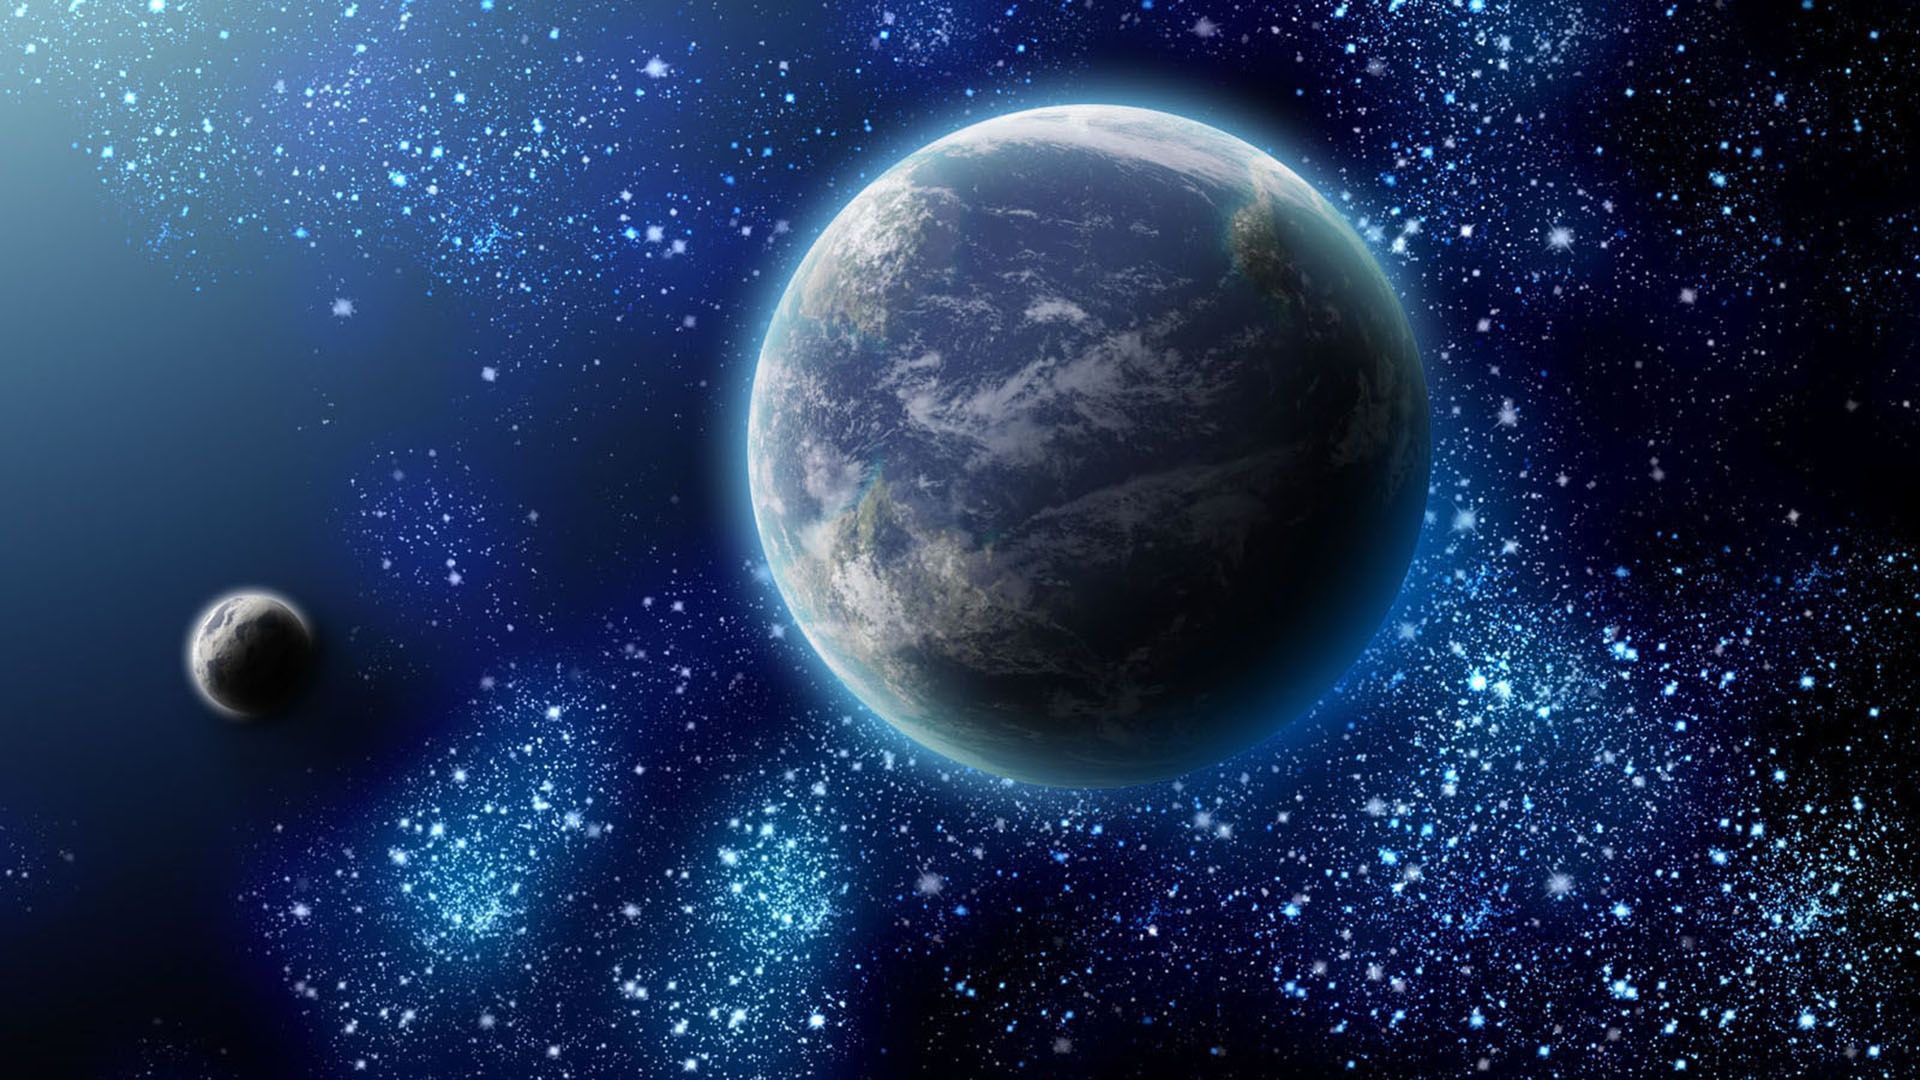 cool-space-planets-backgrounds-for-desktop-1920x1080.jpg